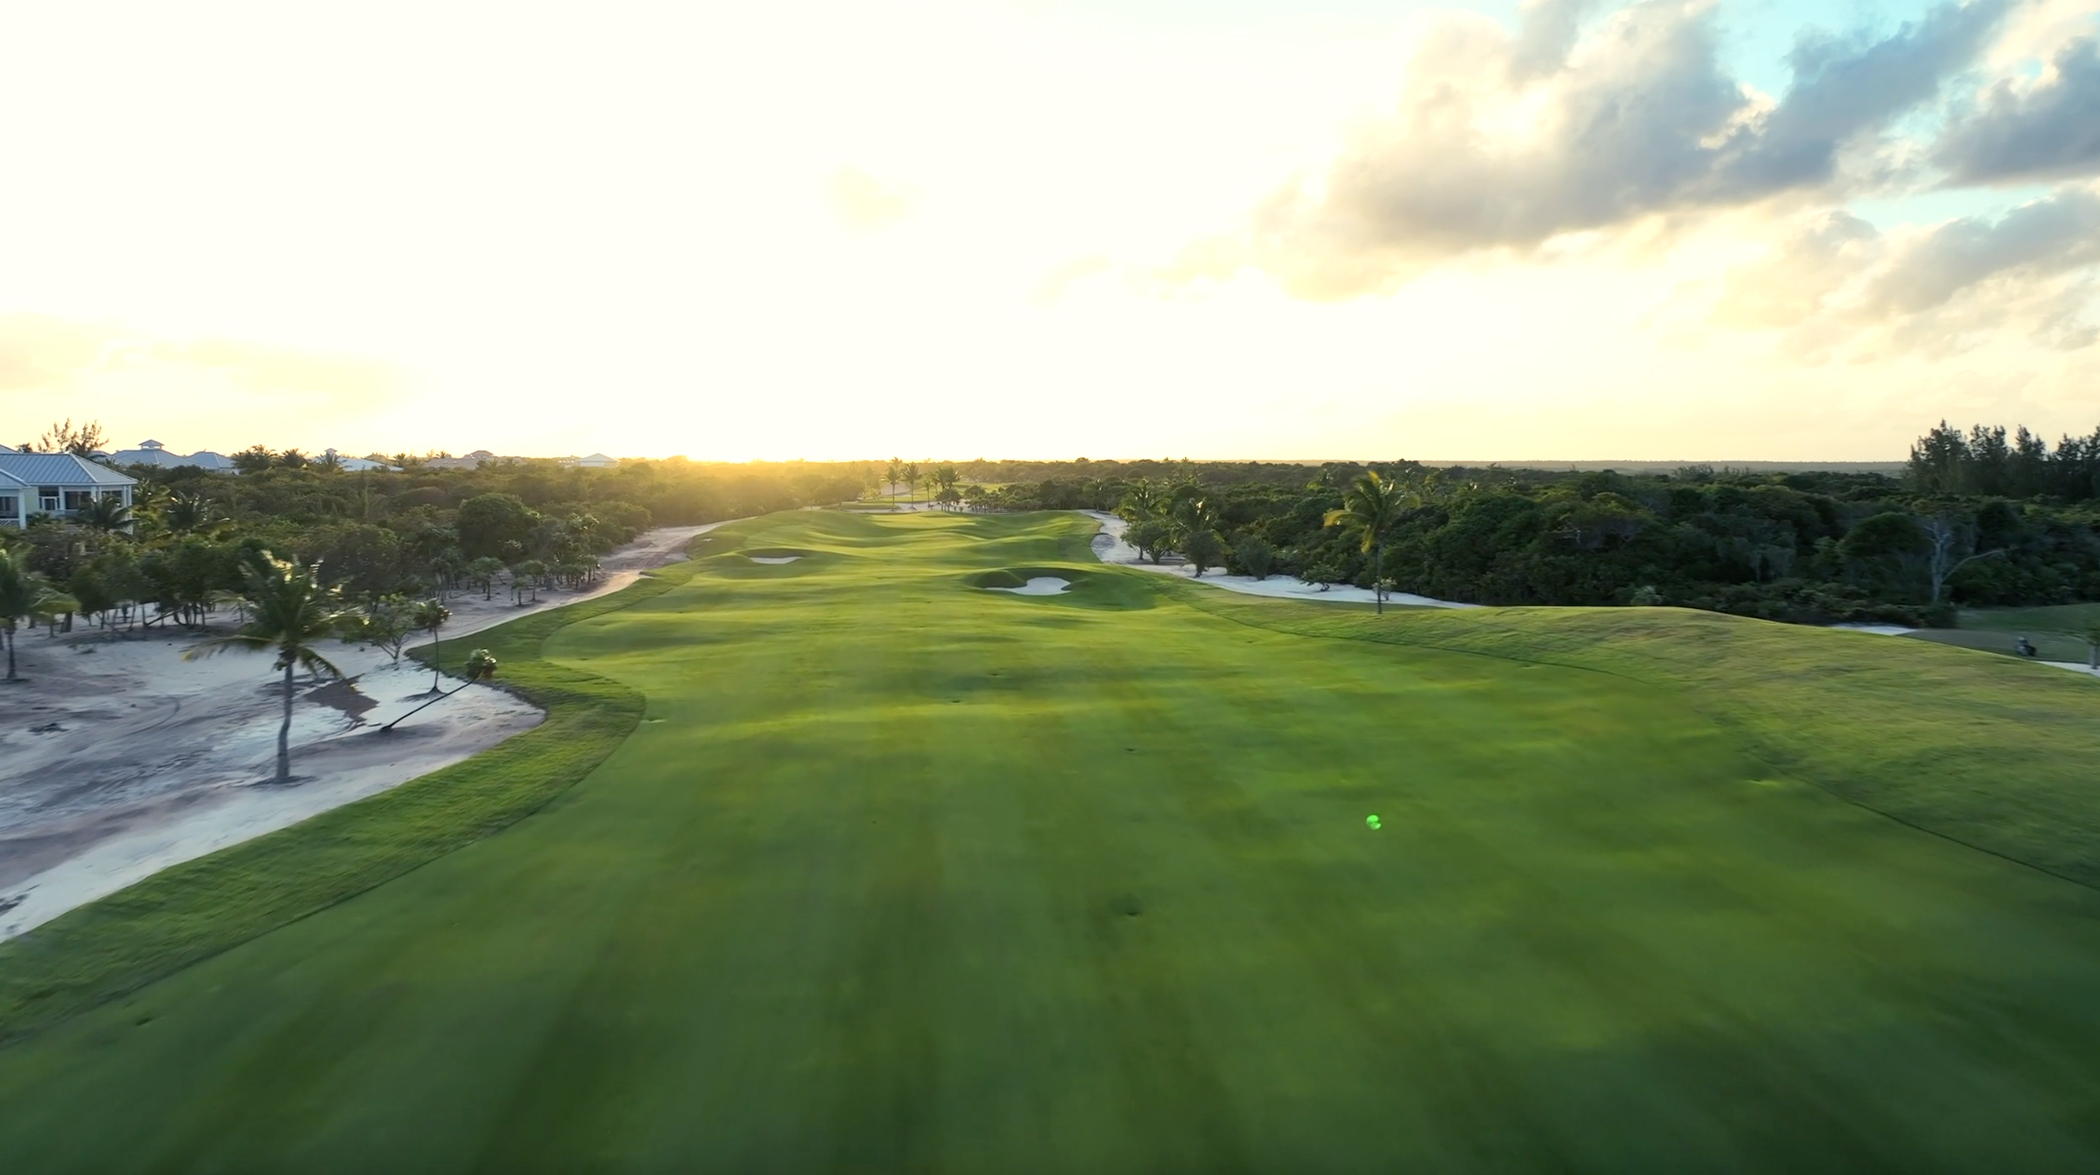 Aerial shot of Hole 1 from The Abaco Club golf course